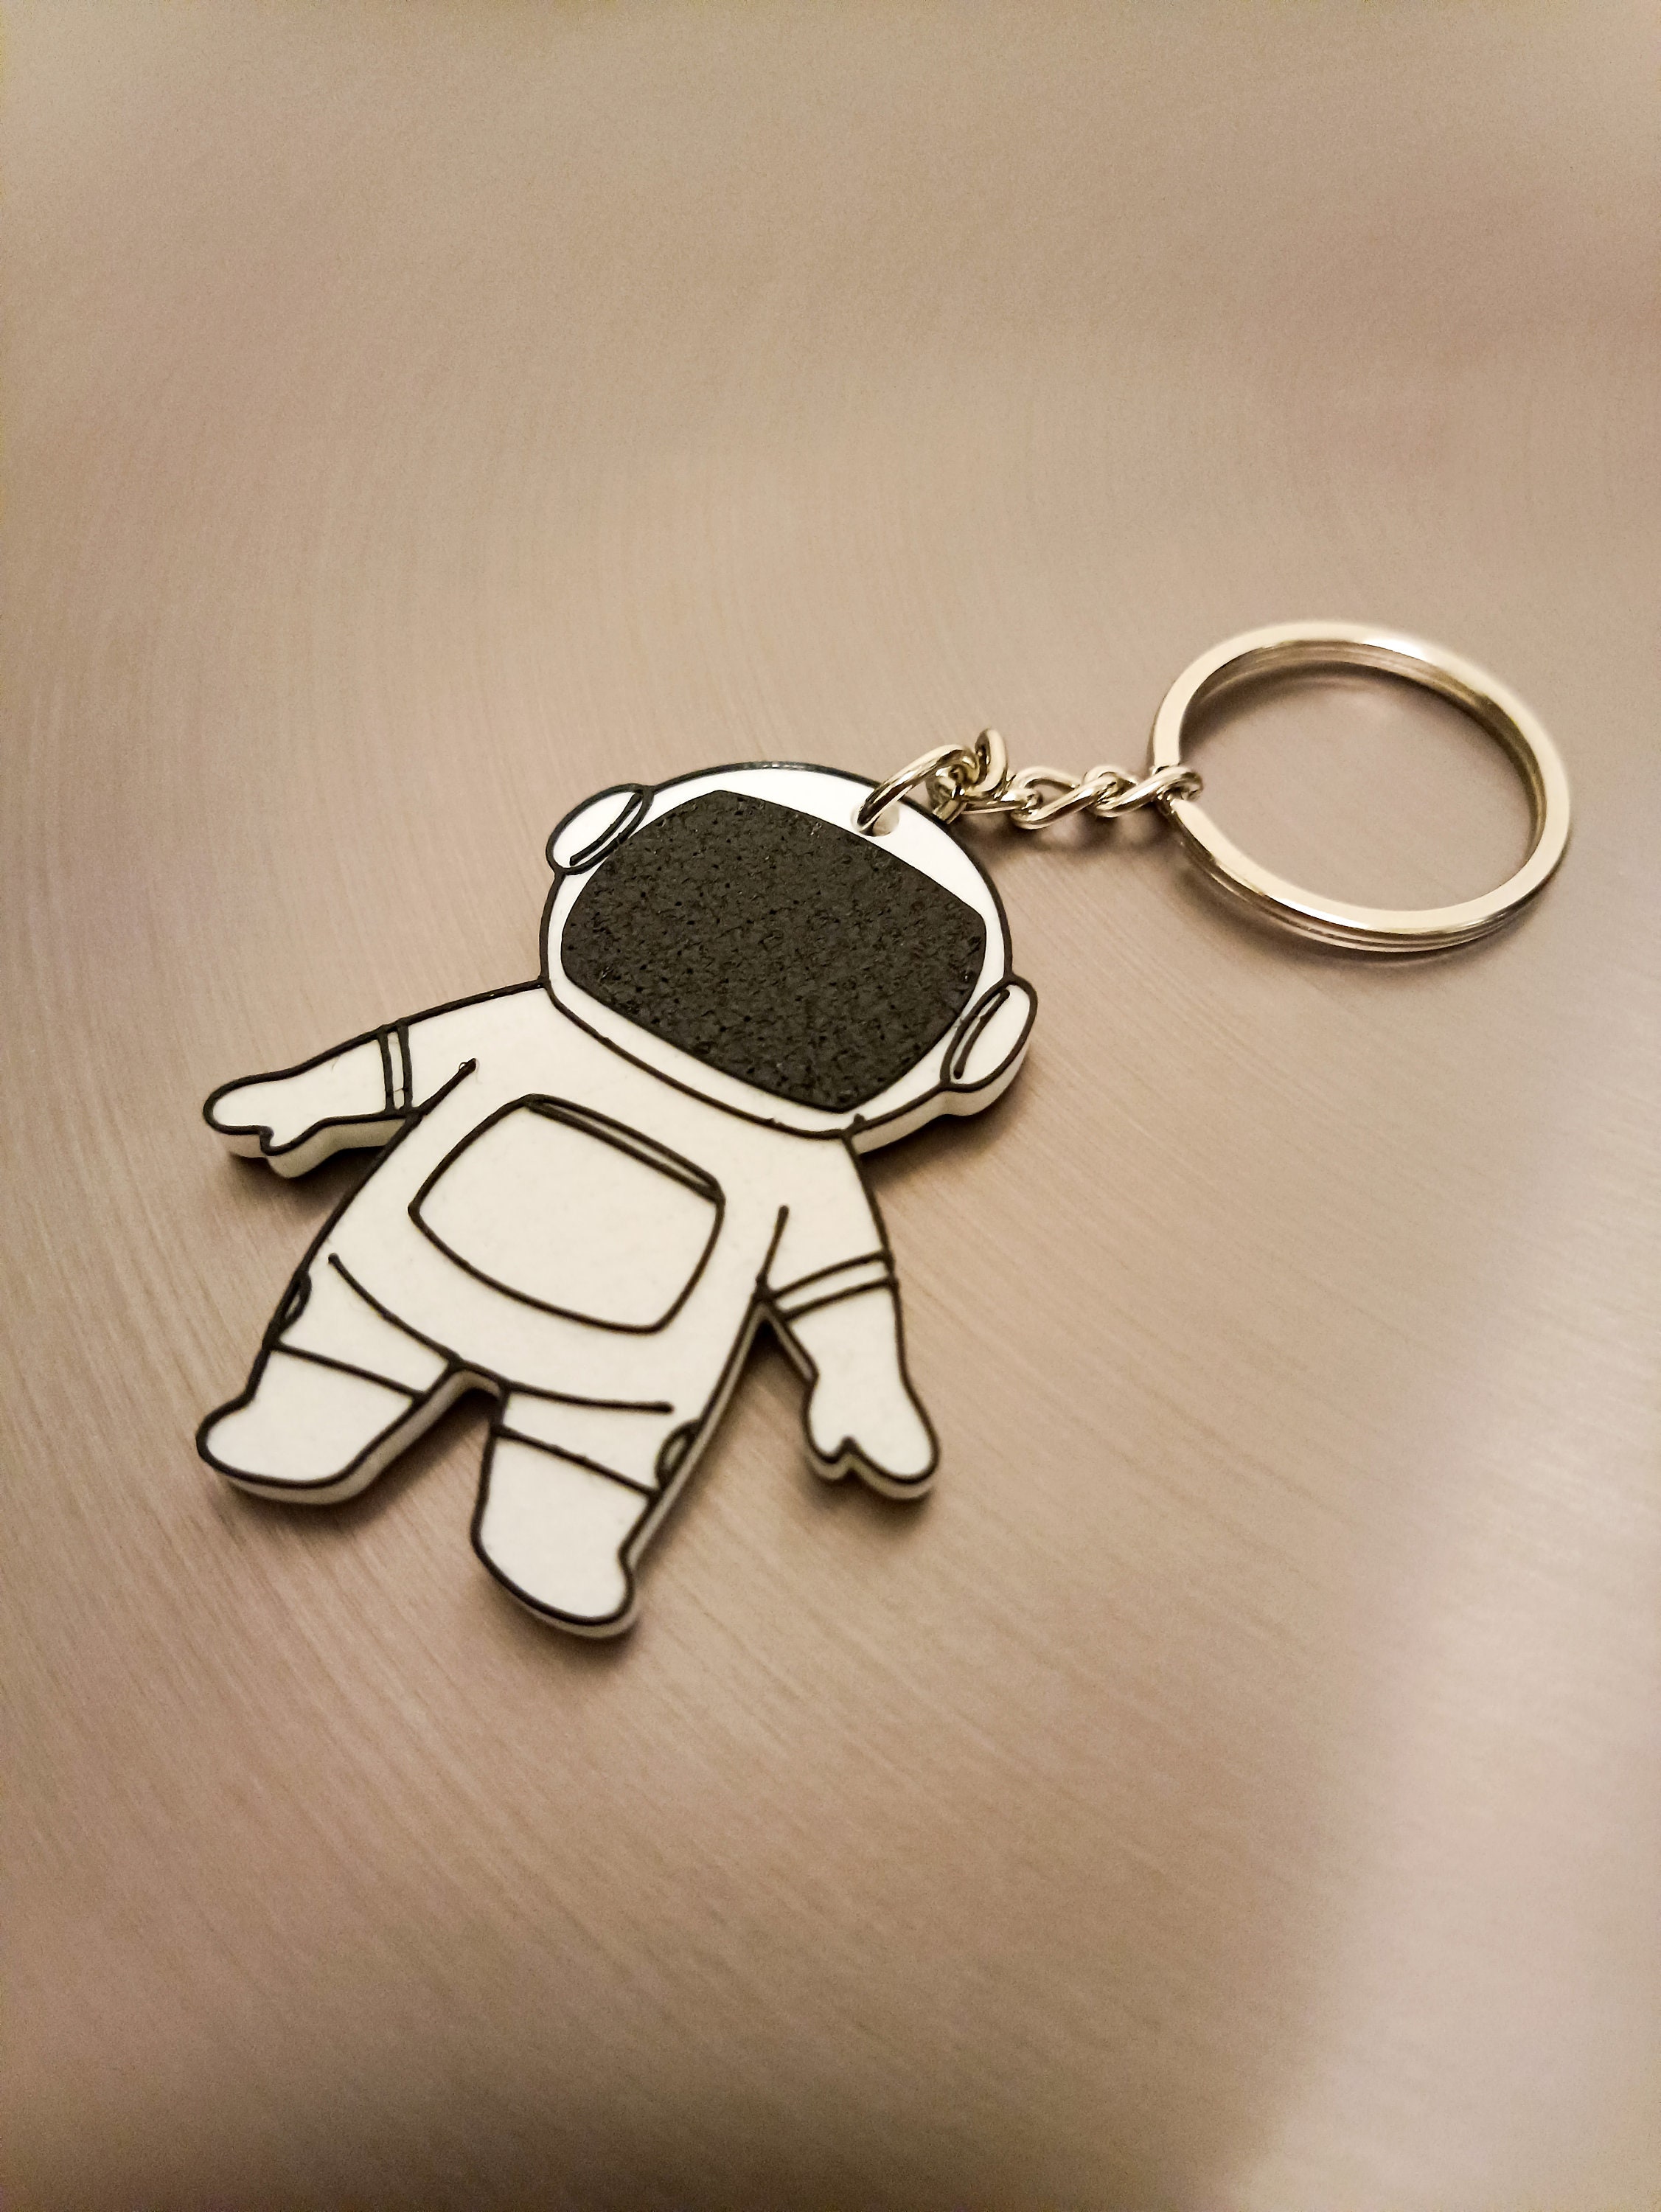 Nine3d 3D Printed Spaceman Keychain - Astronaut Figurine - Space Exploration Gift - Space Lover Key Ring - Personalized Keychain - Handmade - Gift